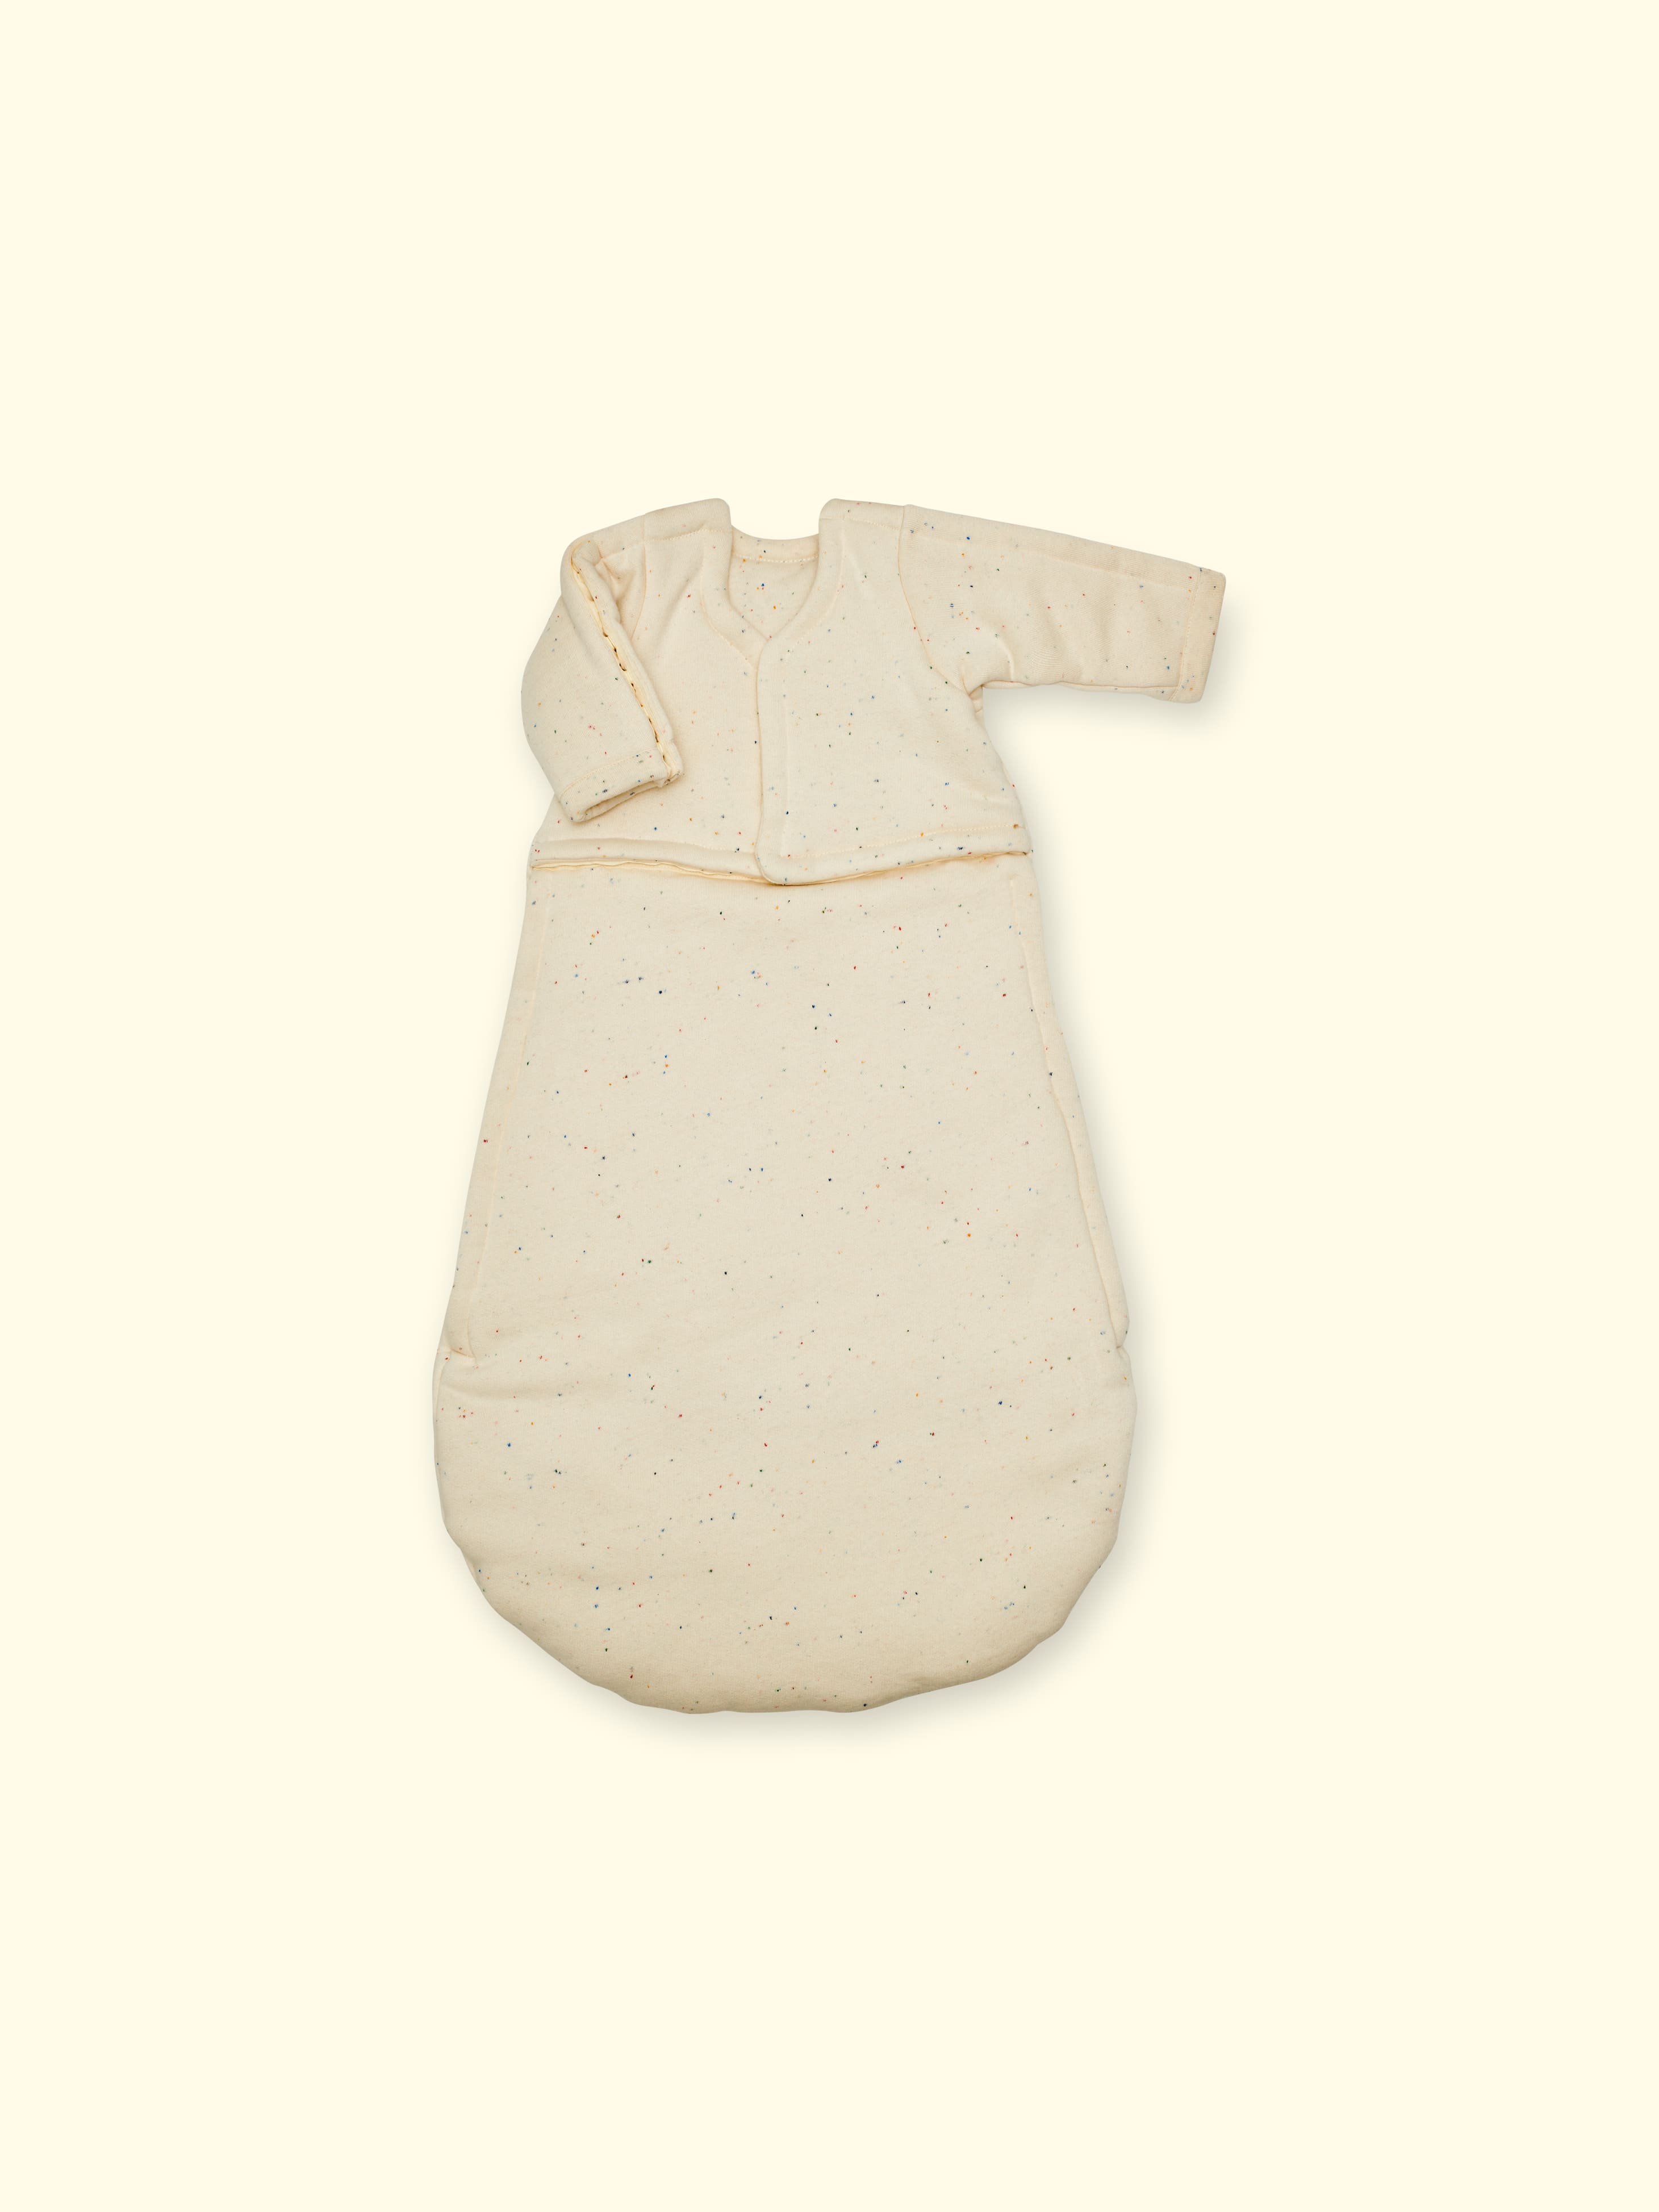 Sleeping bag for premature babies, babies and children - up to size 116